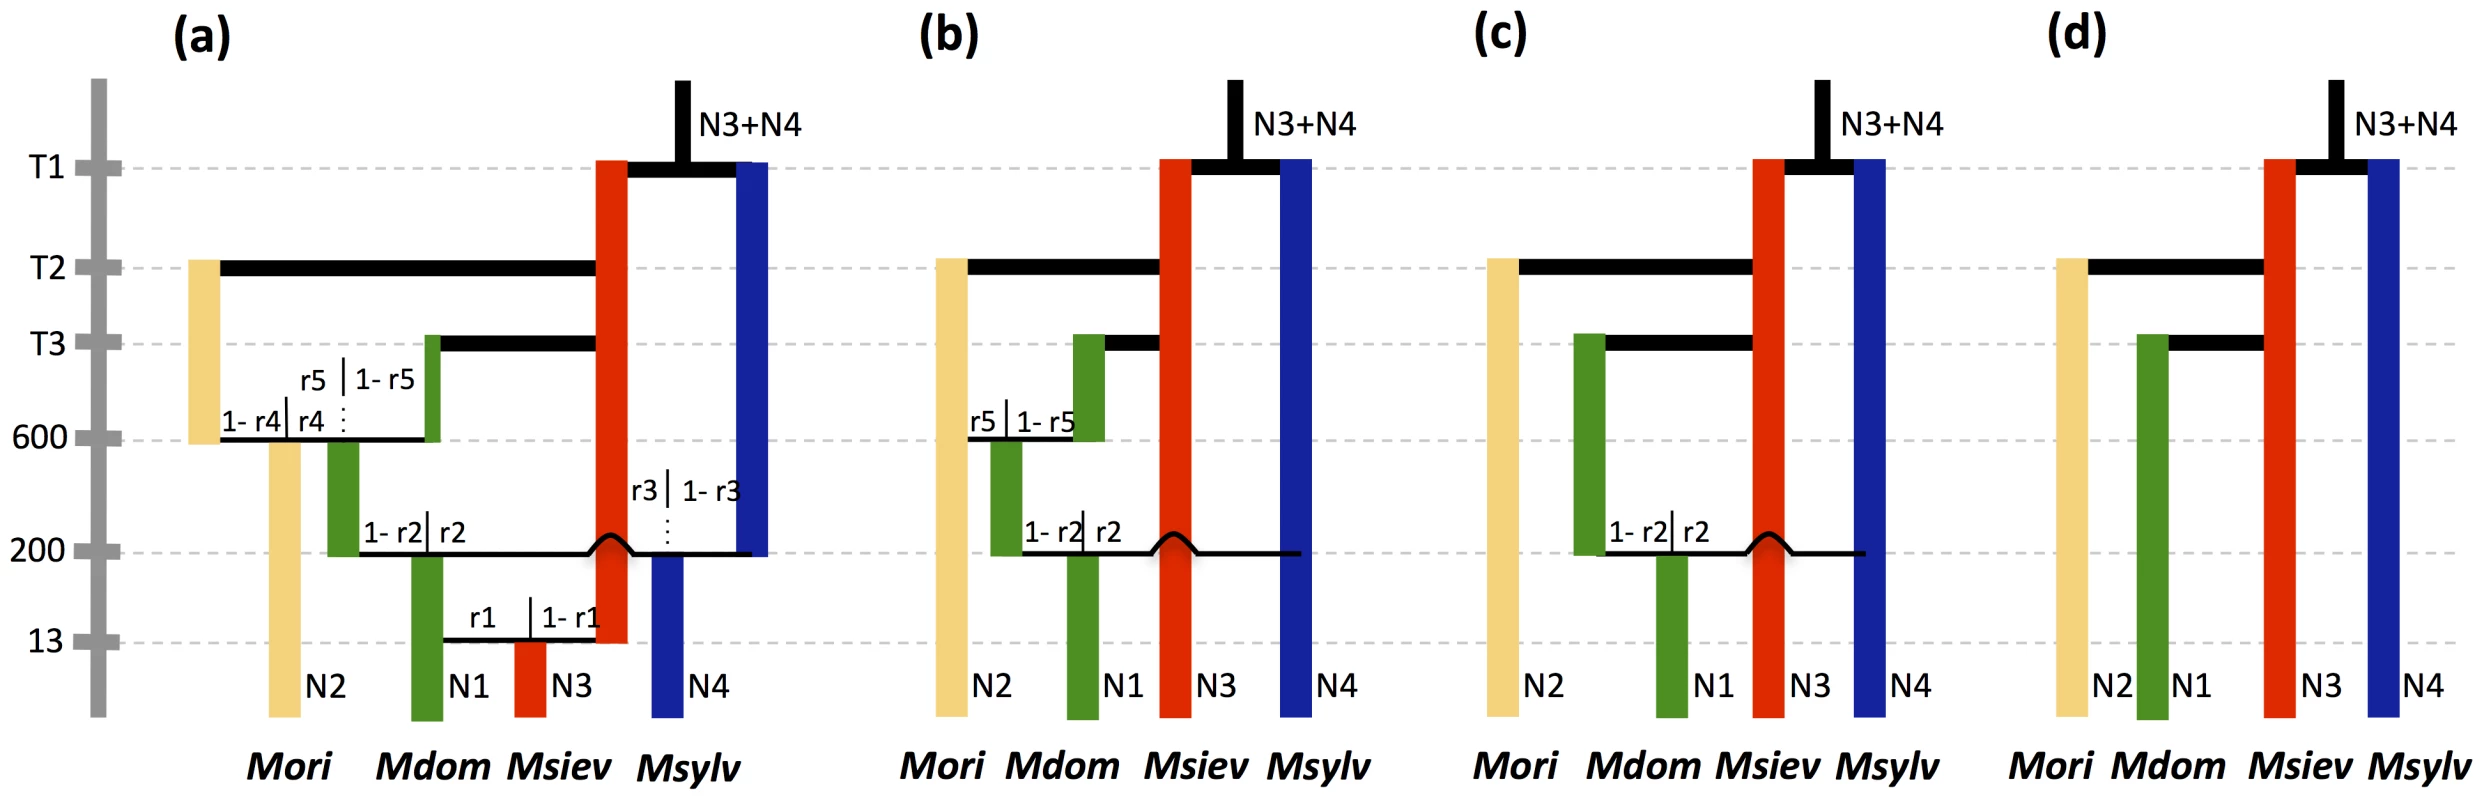 Admixture models compared in approximate Bayesian computations.